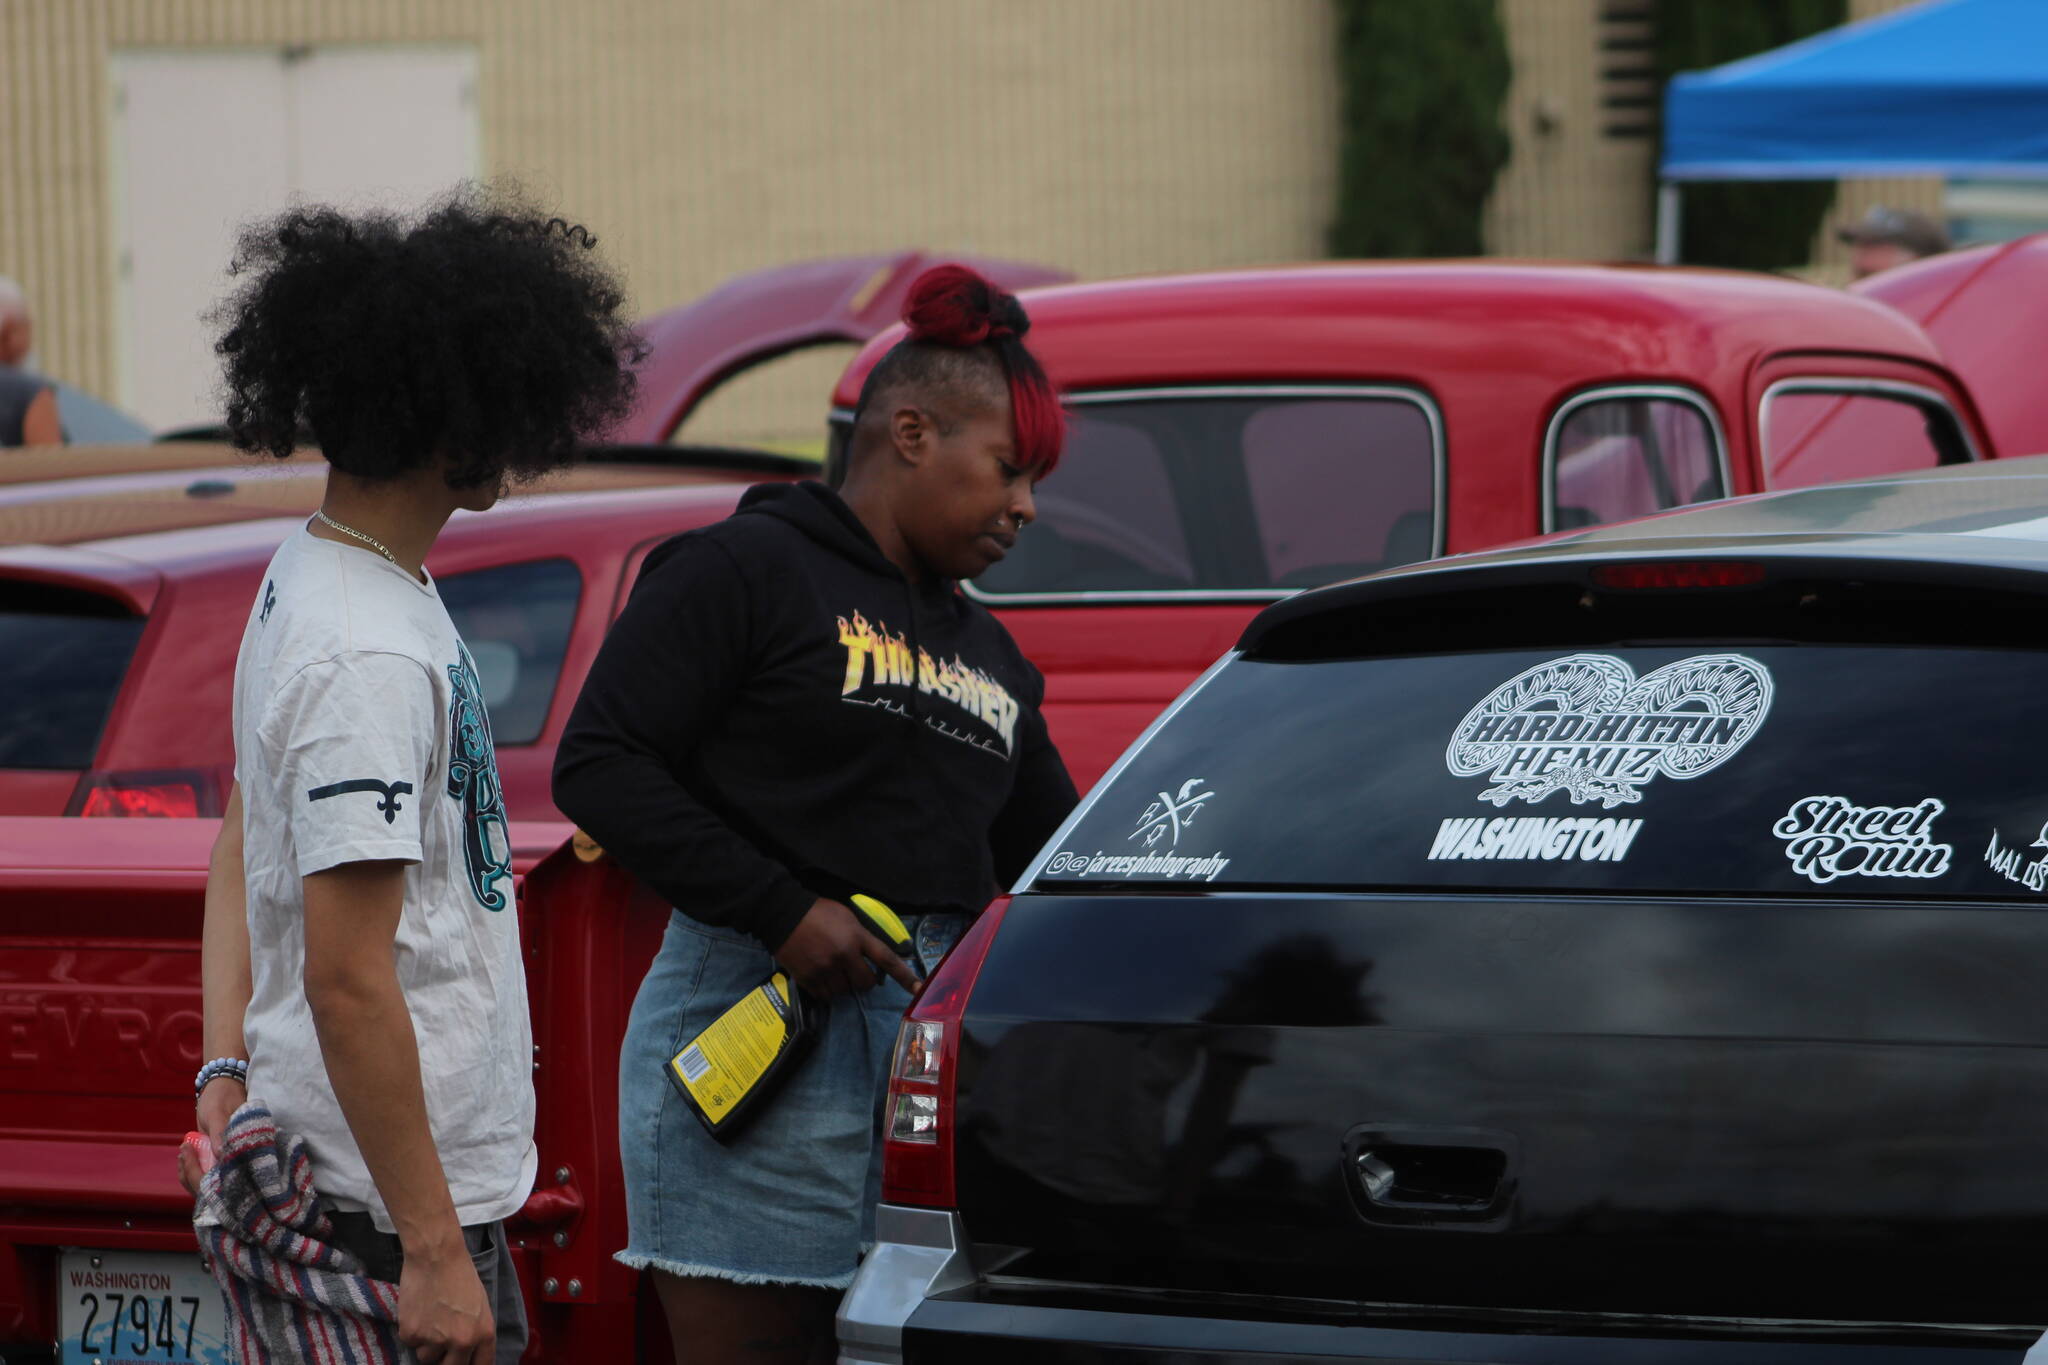 Jaree Johnson cleans her car on Aug. 27. Johnson won the 25 Years and New Stock model category with her 2007 Dodge Magnum. Olivia Sullivan/the Mirror